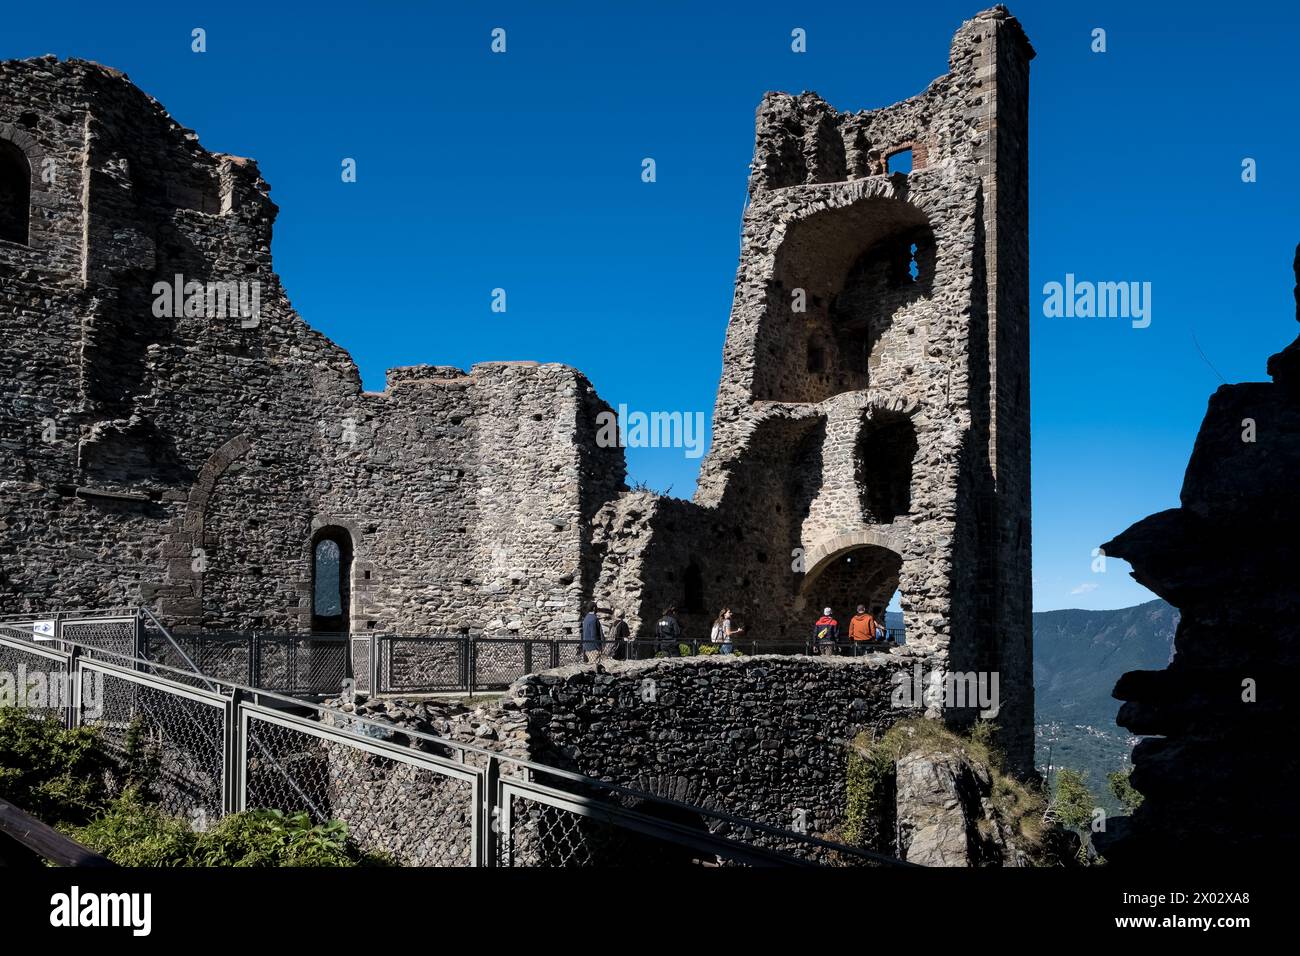 Detail of the Sacra di San Michele, (Saint Michael's Abbey), a religious complex on Mount Pirchiriano, on south side of the Val di Susa Stock Photo